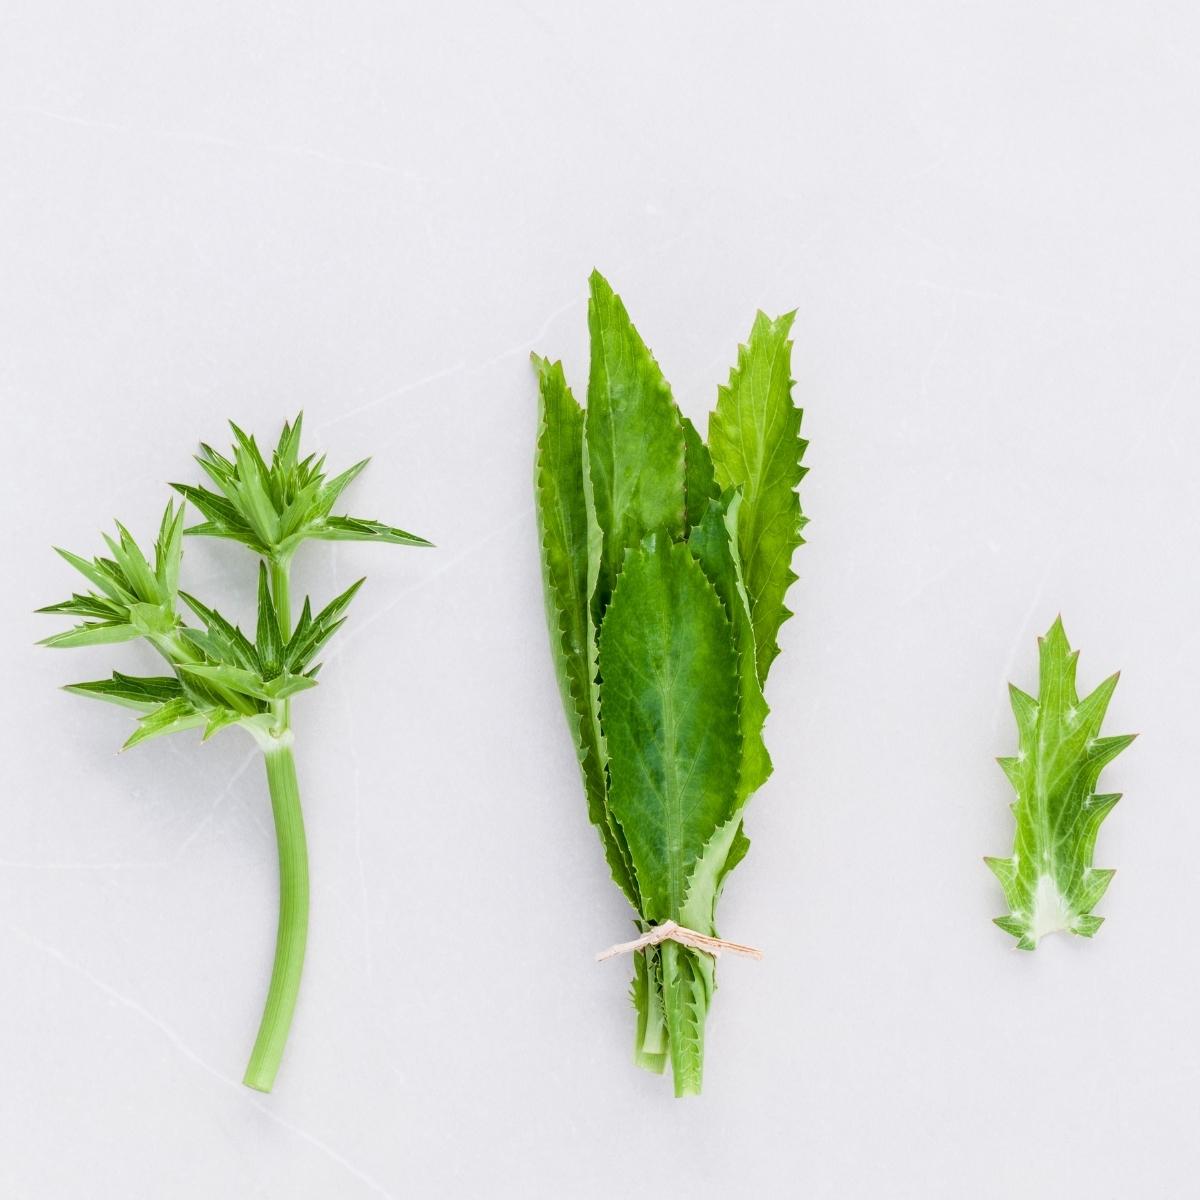 Long narrow serrated green leaves of culantro on a white background.